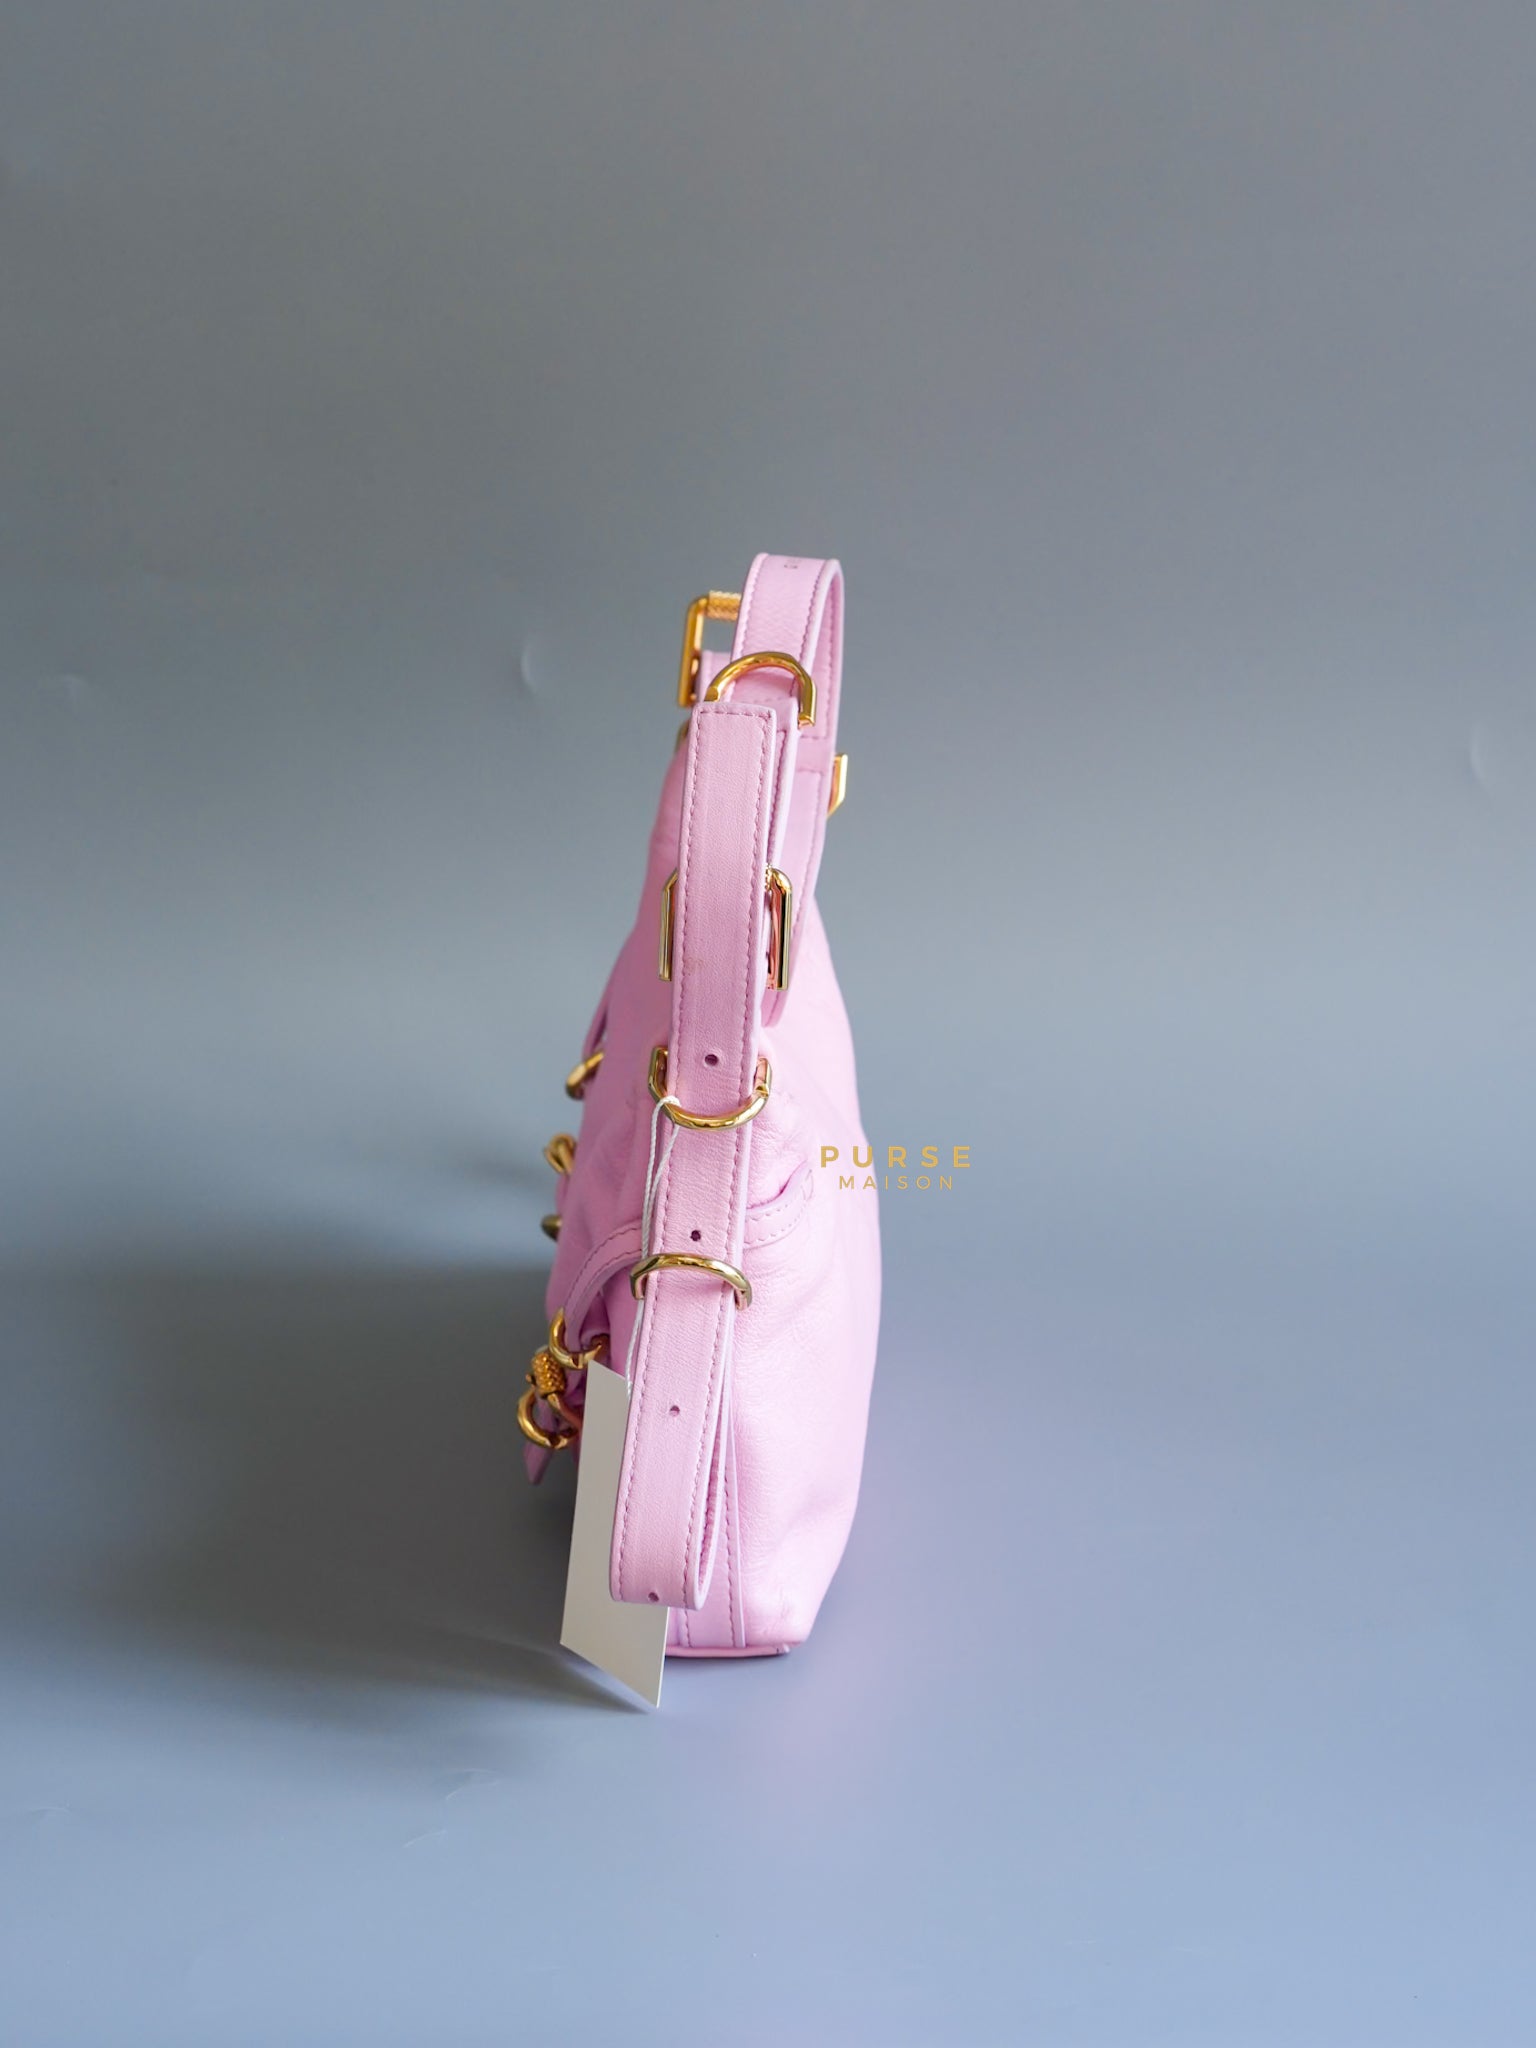 Voyou Mini in Pink Leather & Gold Hardware Bag | Purse Maison Luxury Bags Shop